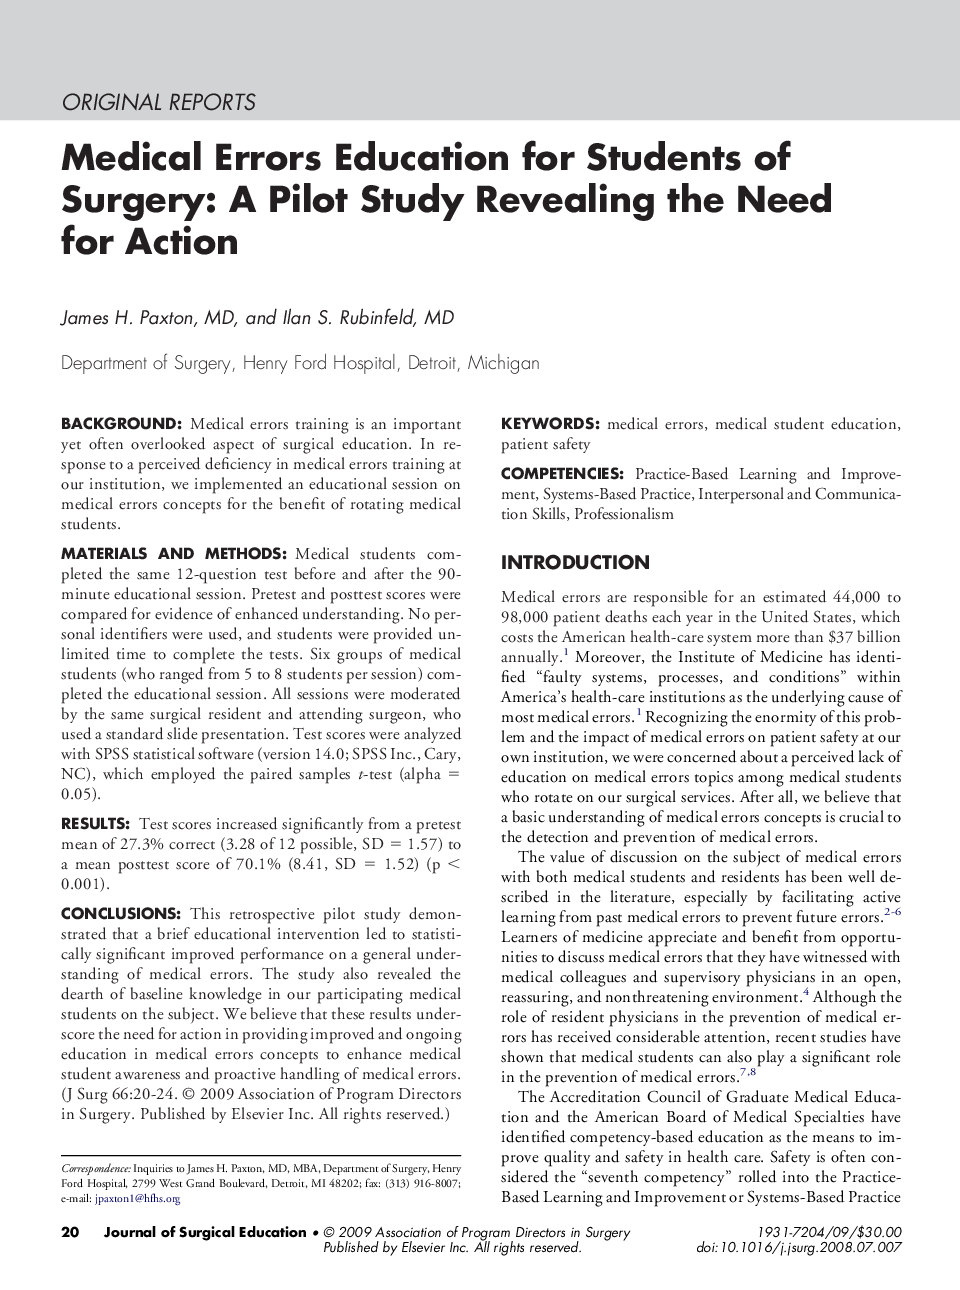 Medical Errors Education for Students of Surgery: A Pilot Study Revealing the Need for Action